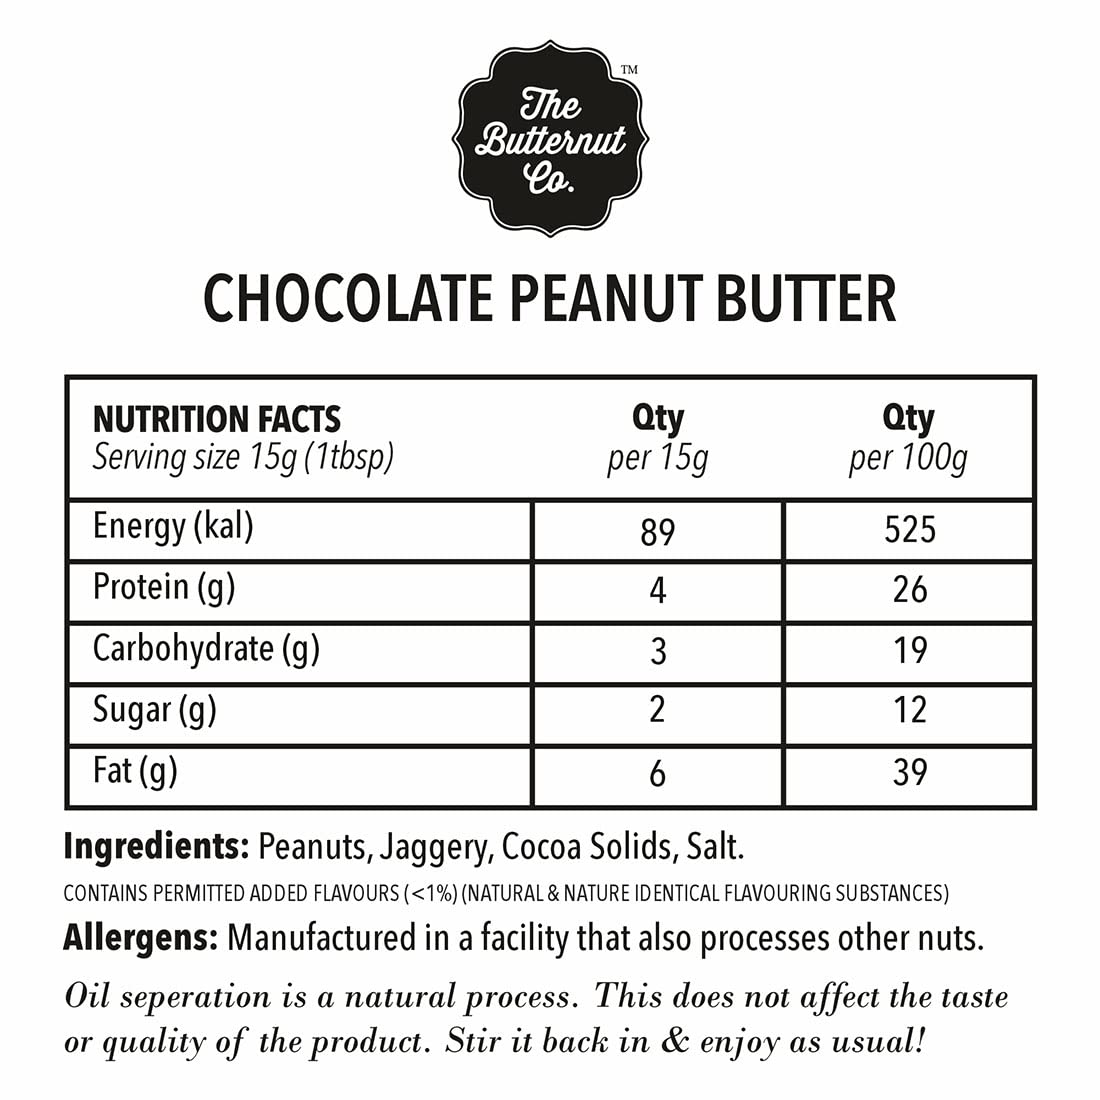 The Butternut Co. Peanut Butter Chocolate, Crunchy 925 gm (No Refined Sugar, High Protein, 100% Natural)